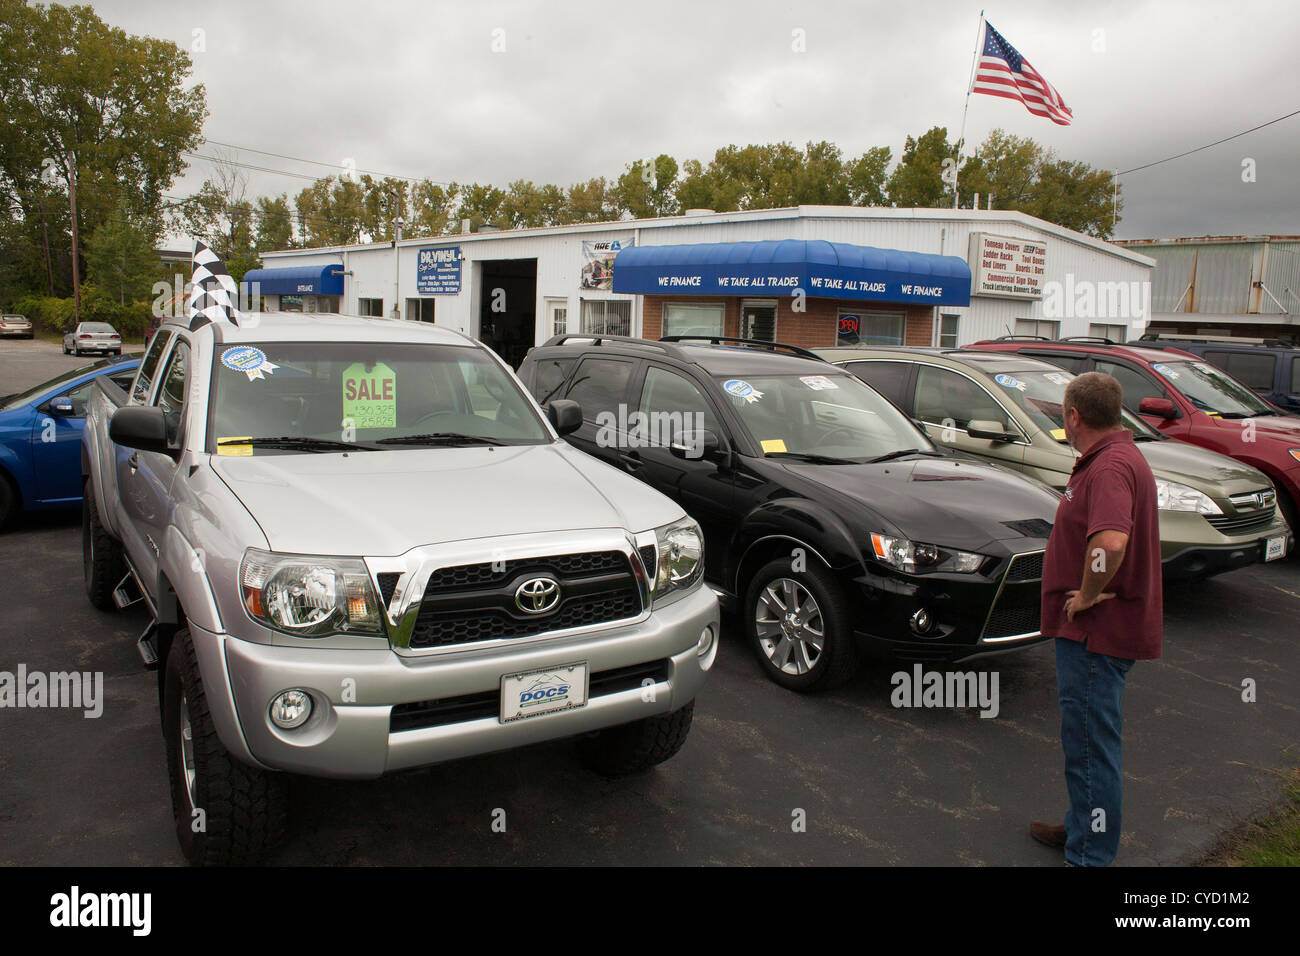 A car salesman looks over his stock in Pittsfield Massachusetts. Stock Photo